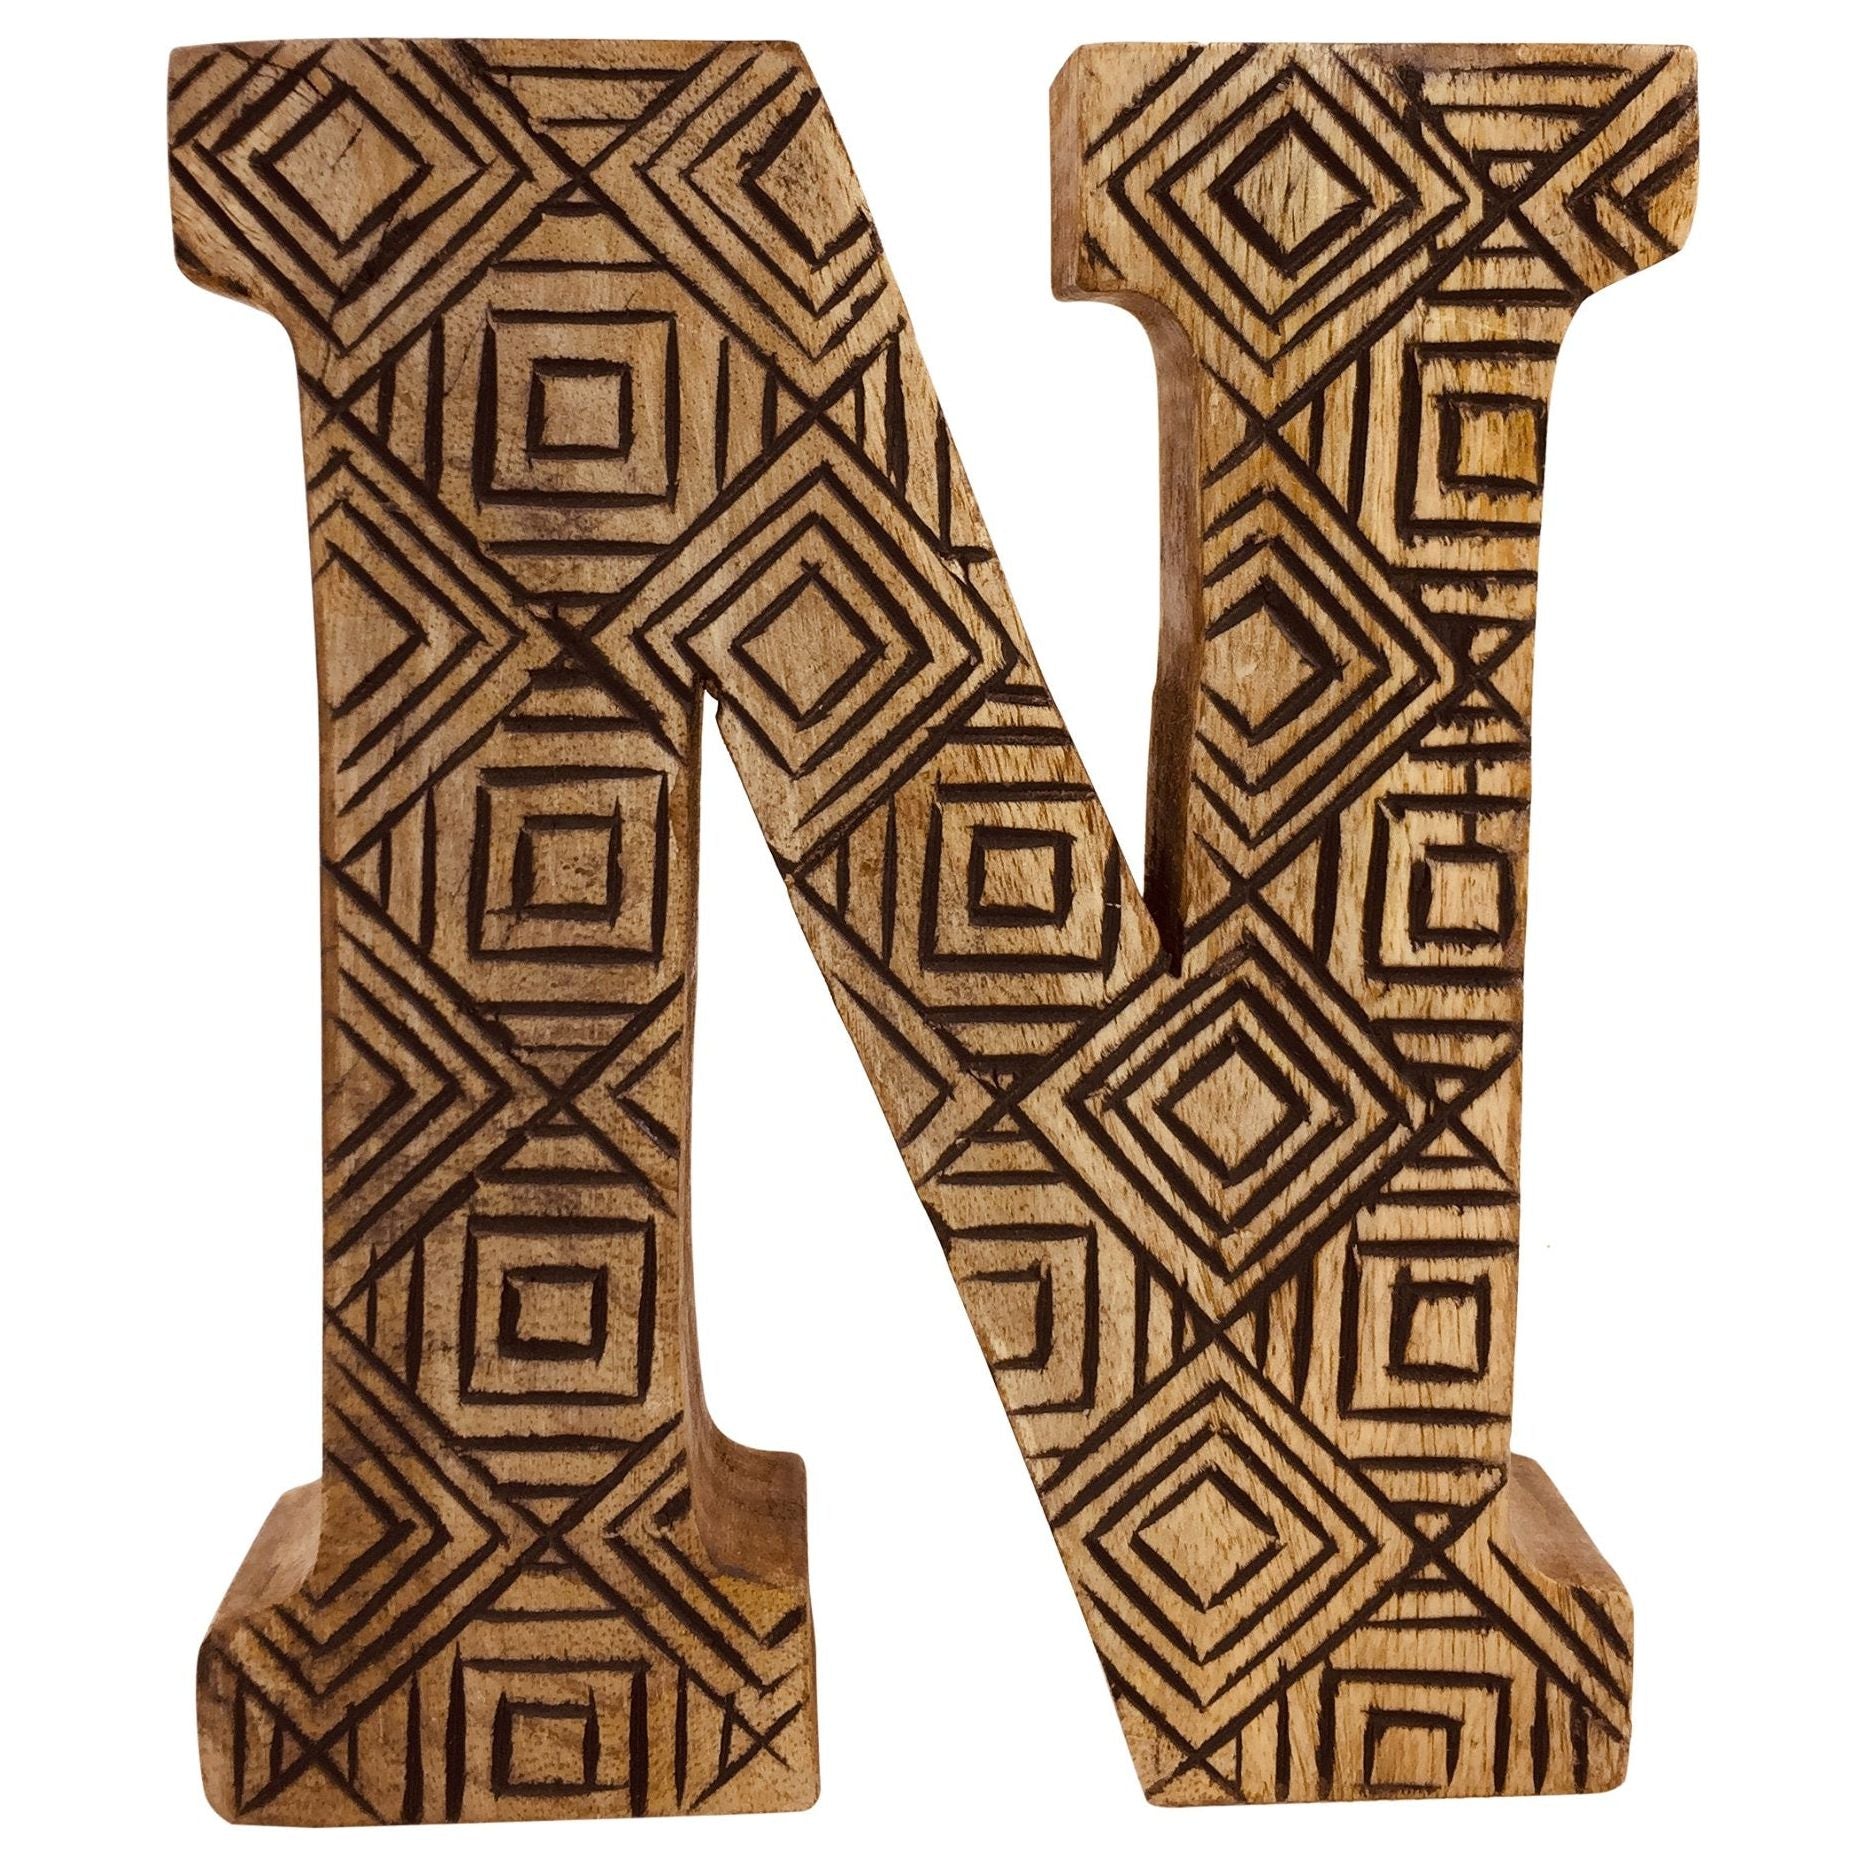 Hand Carved Wooden Geometric Letter N - Ashton and Finch